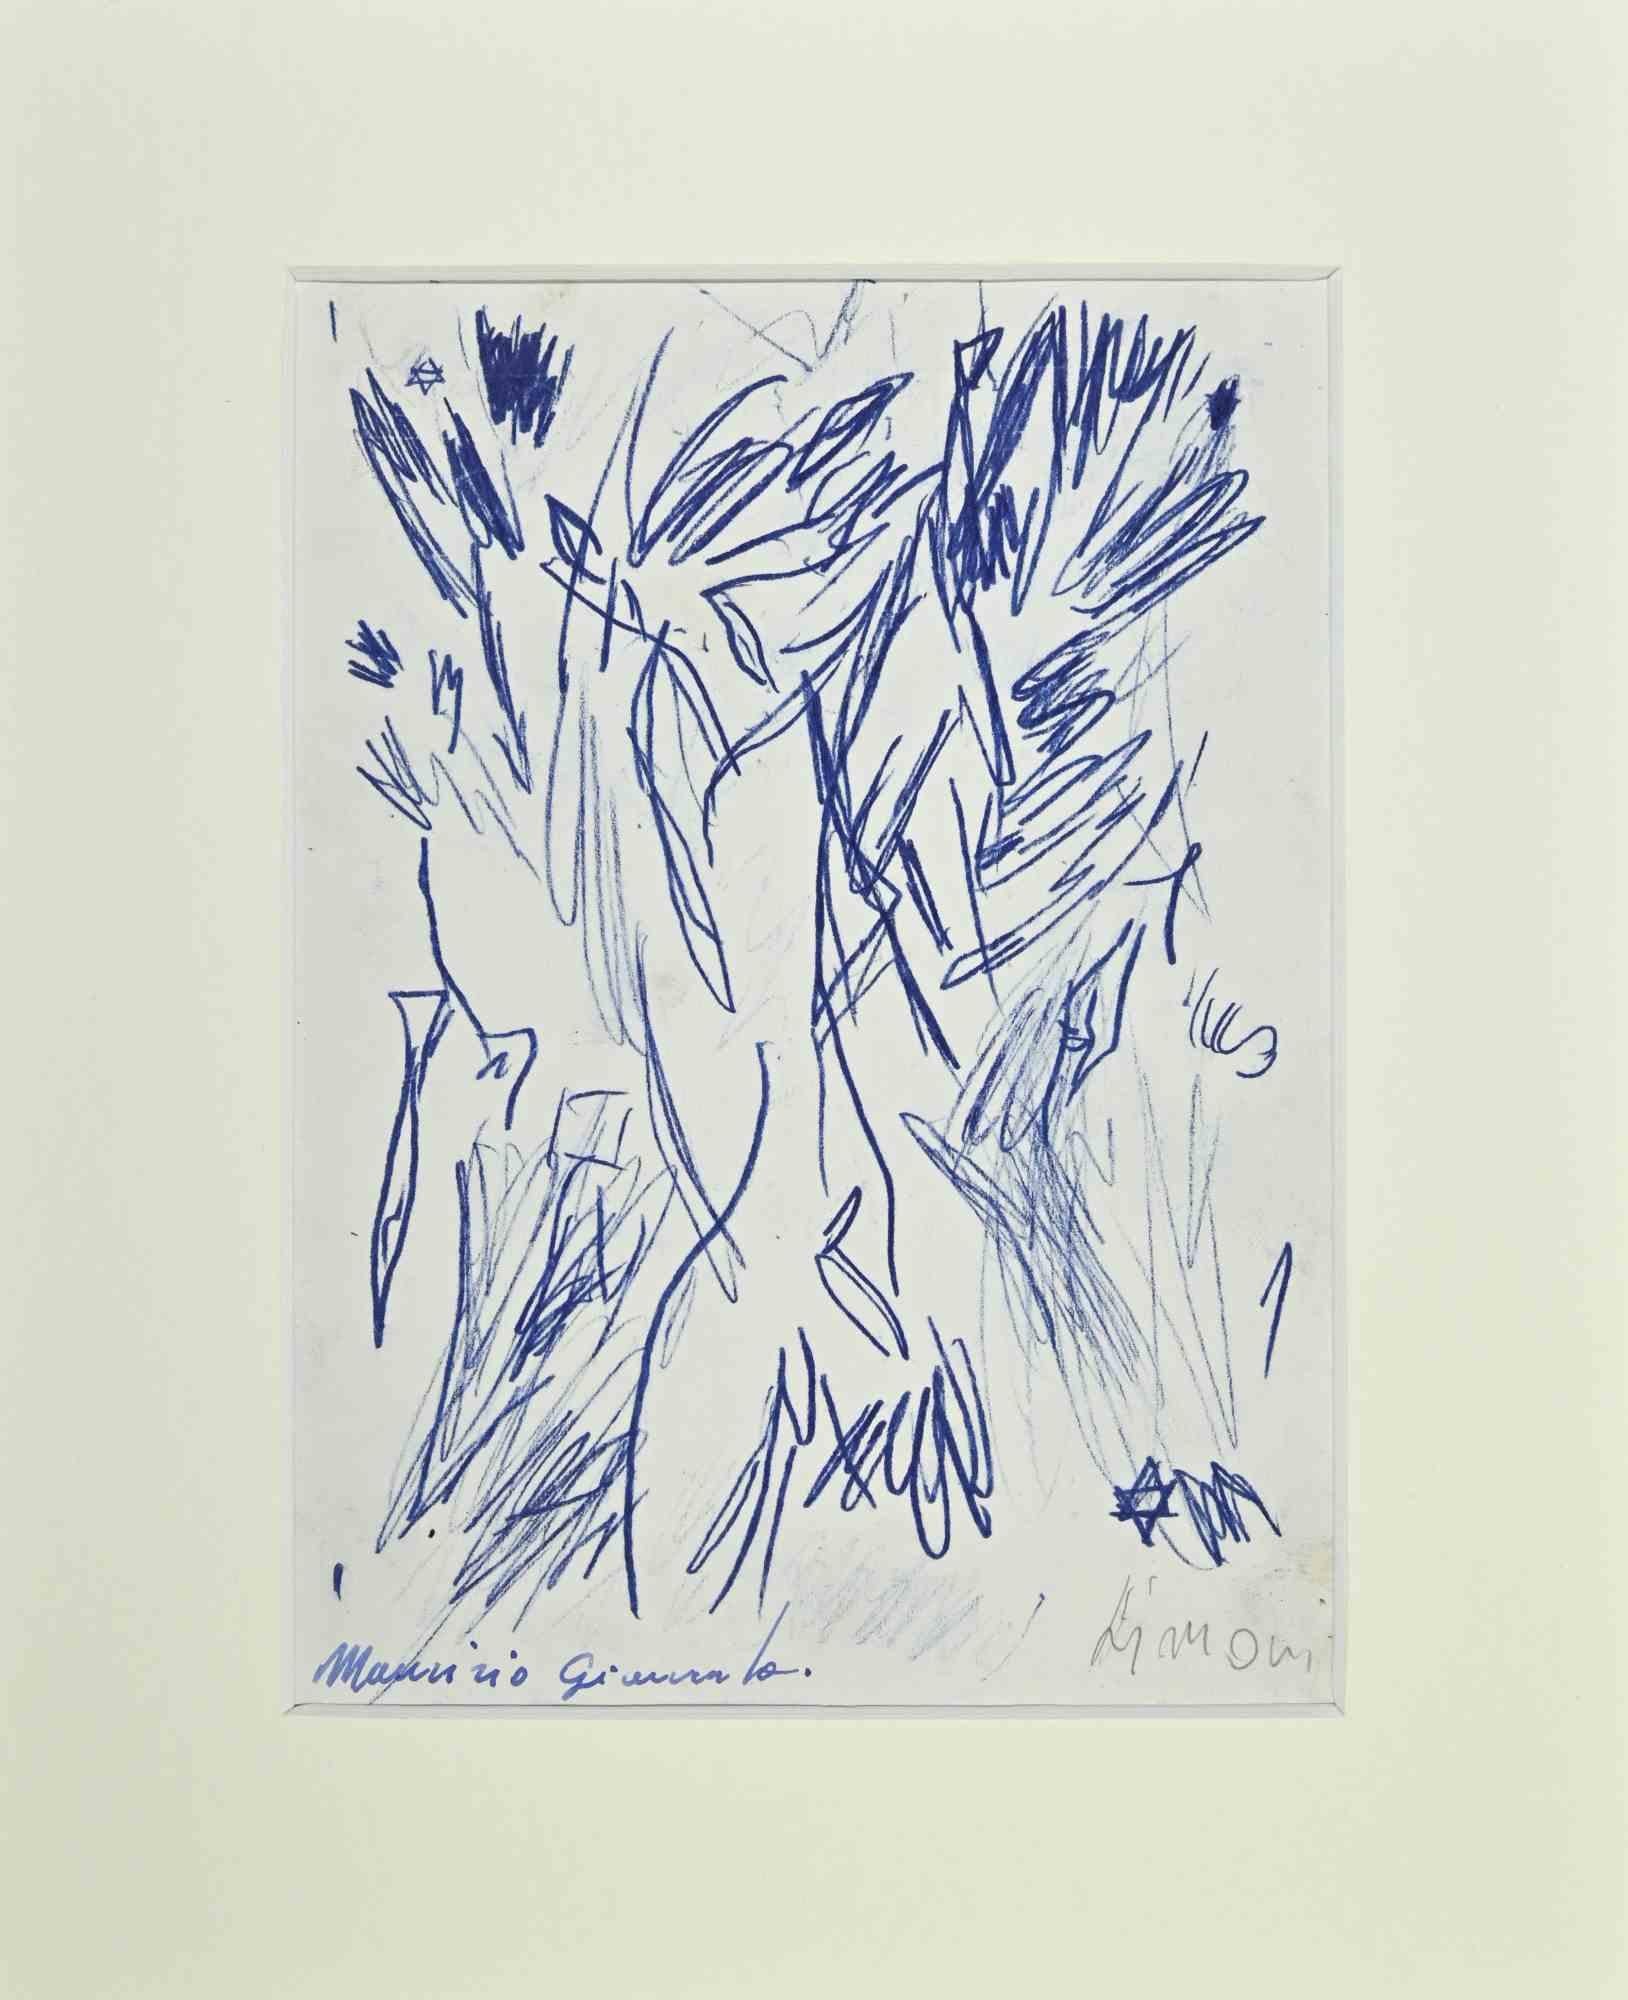 Composition is an artwork realized  in the Mid-20th Century by Giancarlo Limoni.

Drawing in China ink. 

The artwork is in good conditions .

The artwork is depicted skillfully through confident strokes with a dynamic composition.